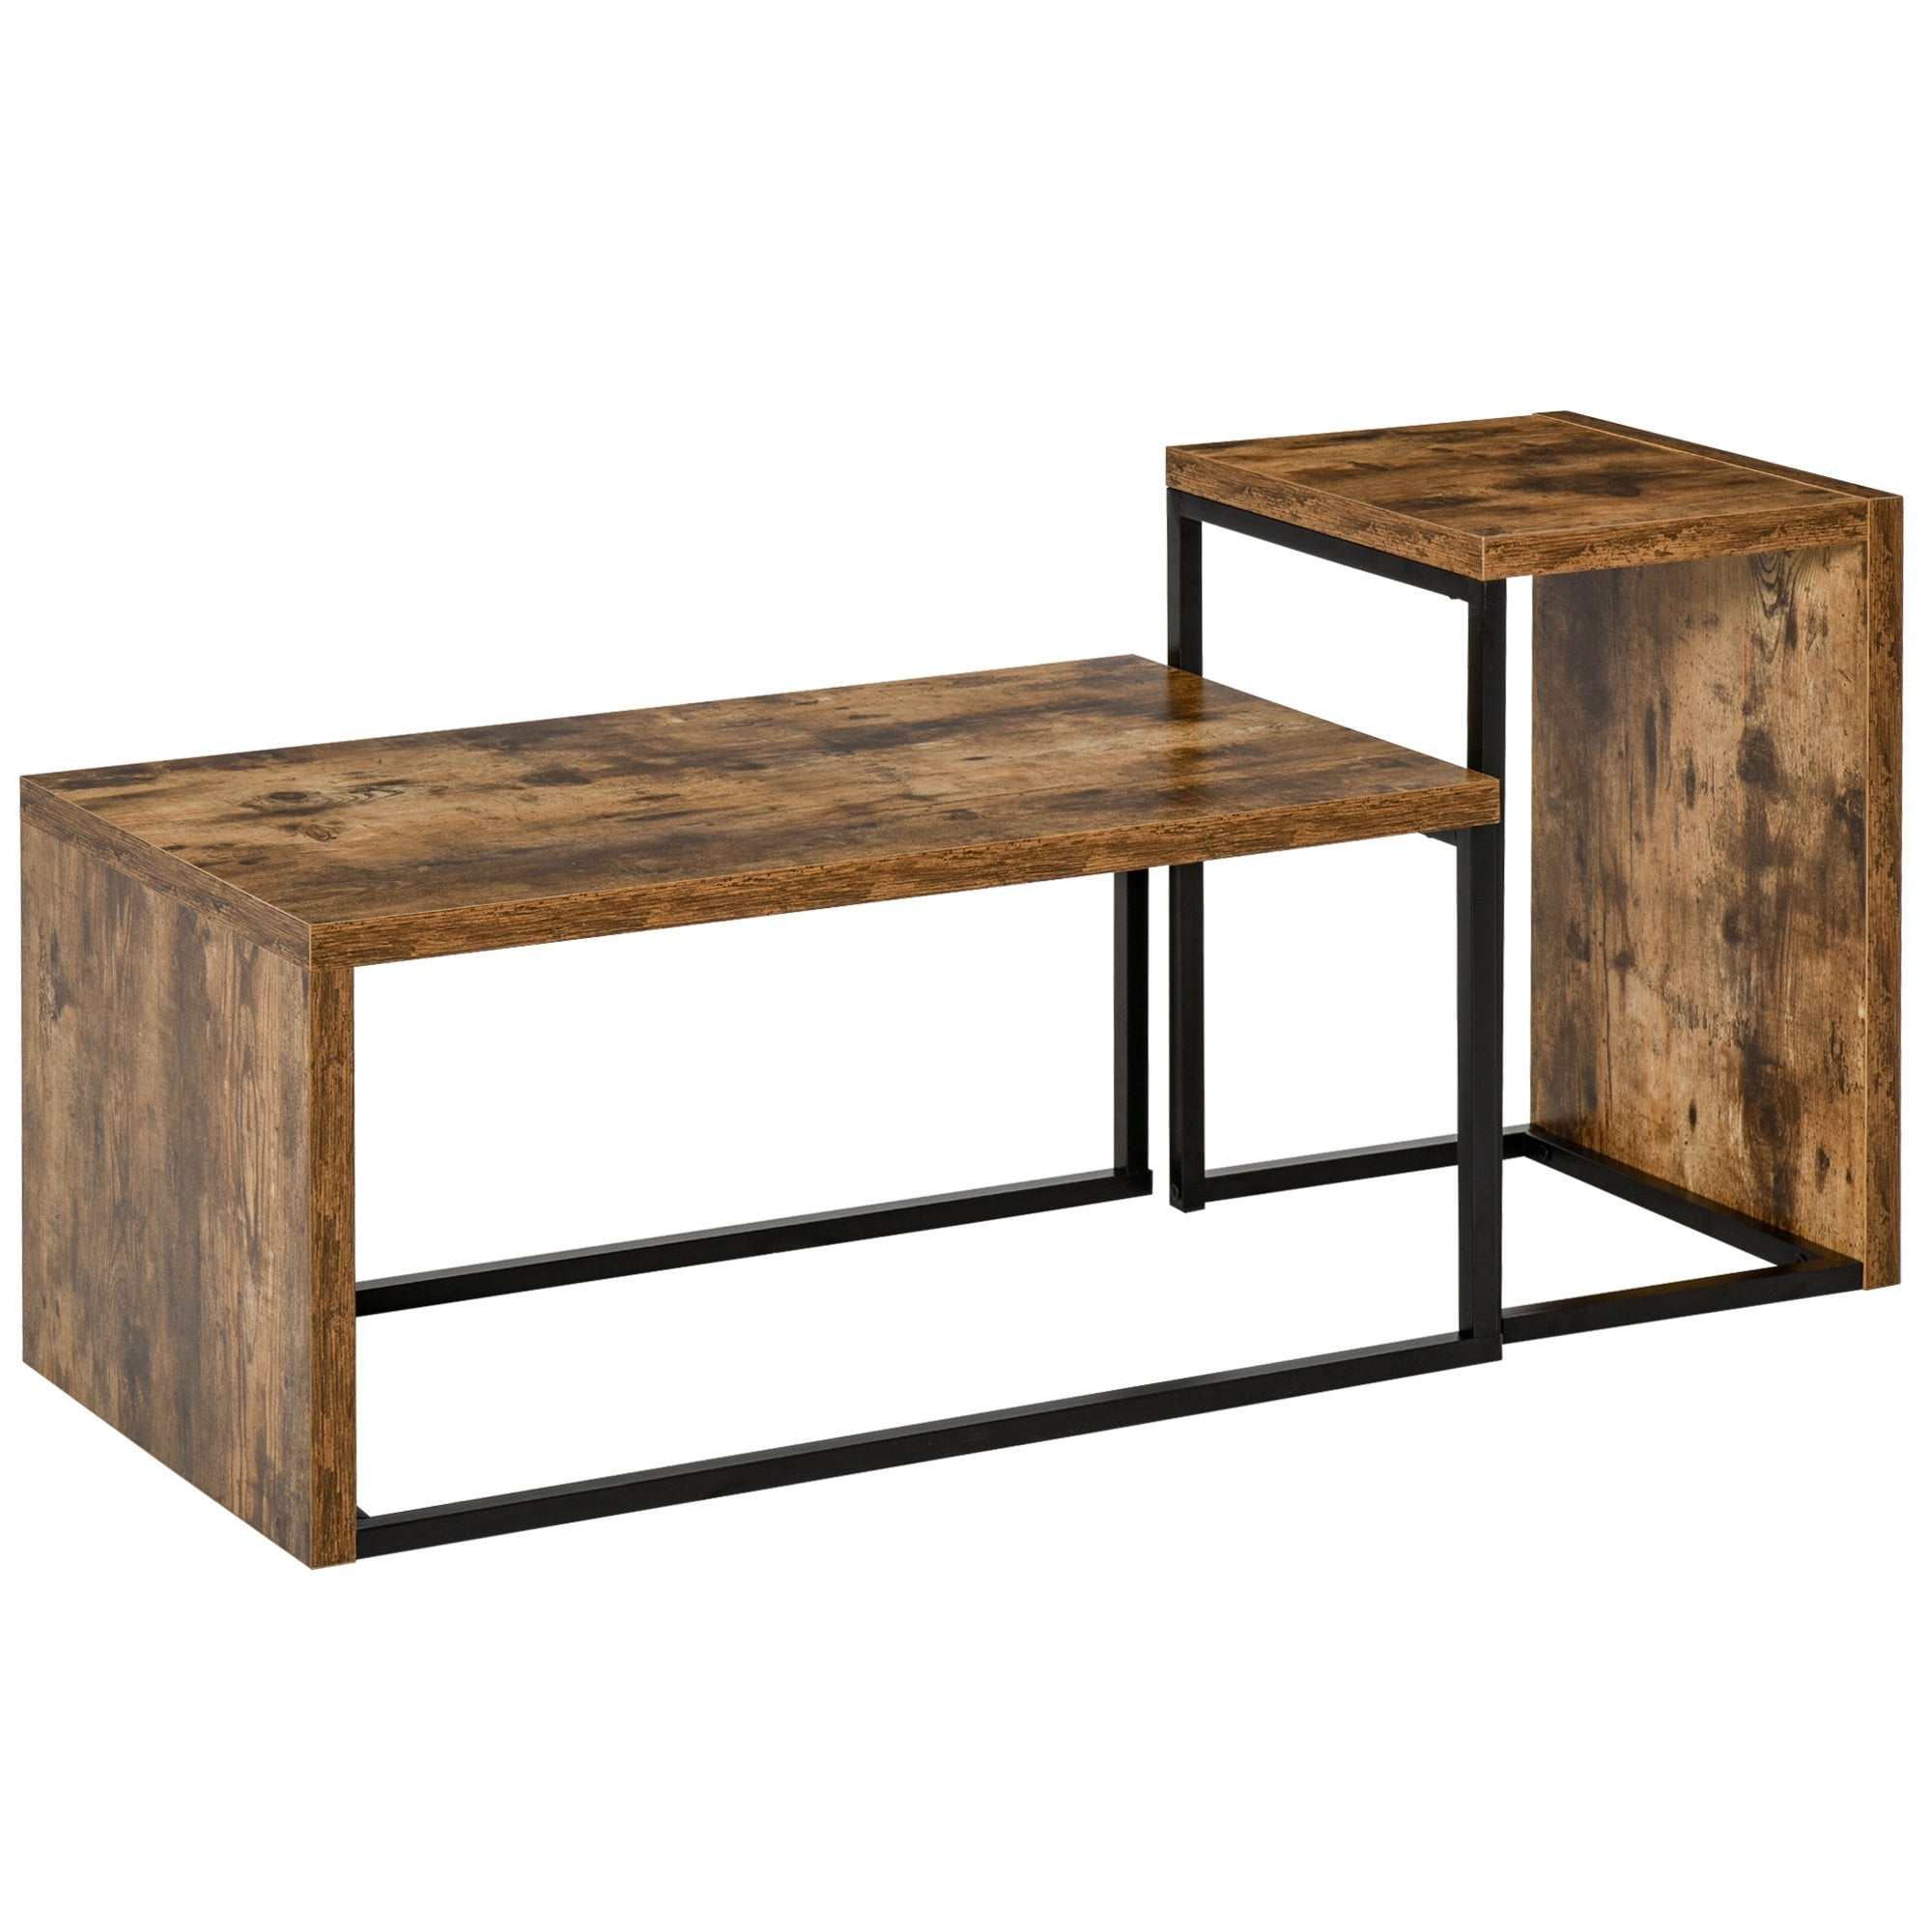 Set of 2 Coffee Tables Industrial Style Tea Table - Side Table w/ Metal Frame for Living Room Bedroom Black & Brown Tables - Home Living  | TJ Hughes